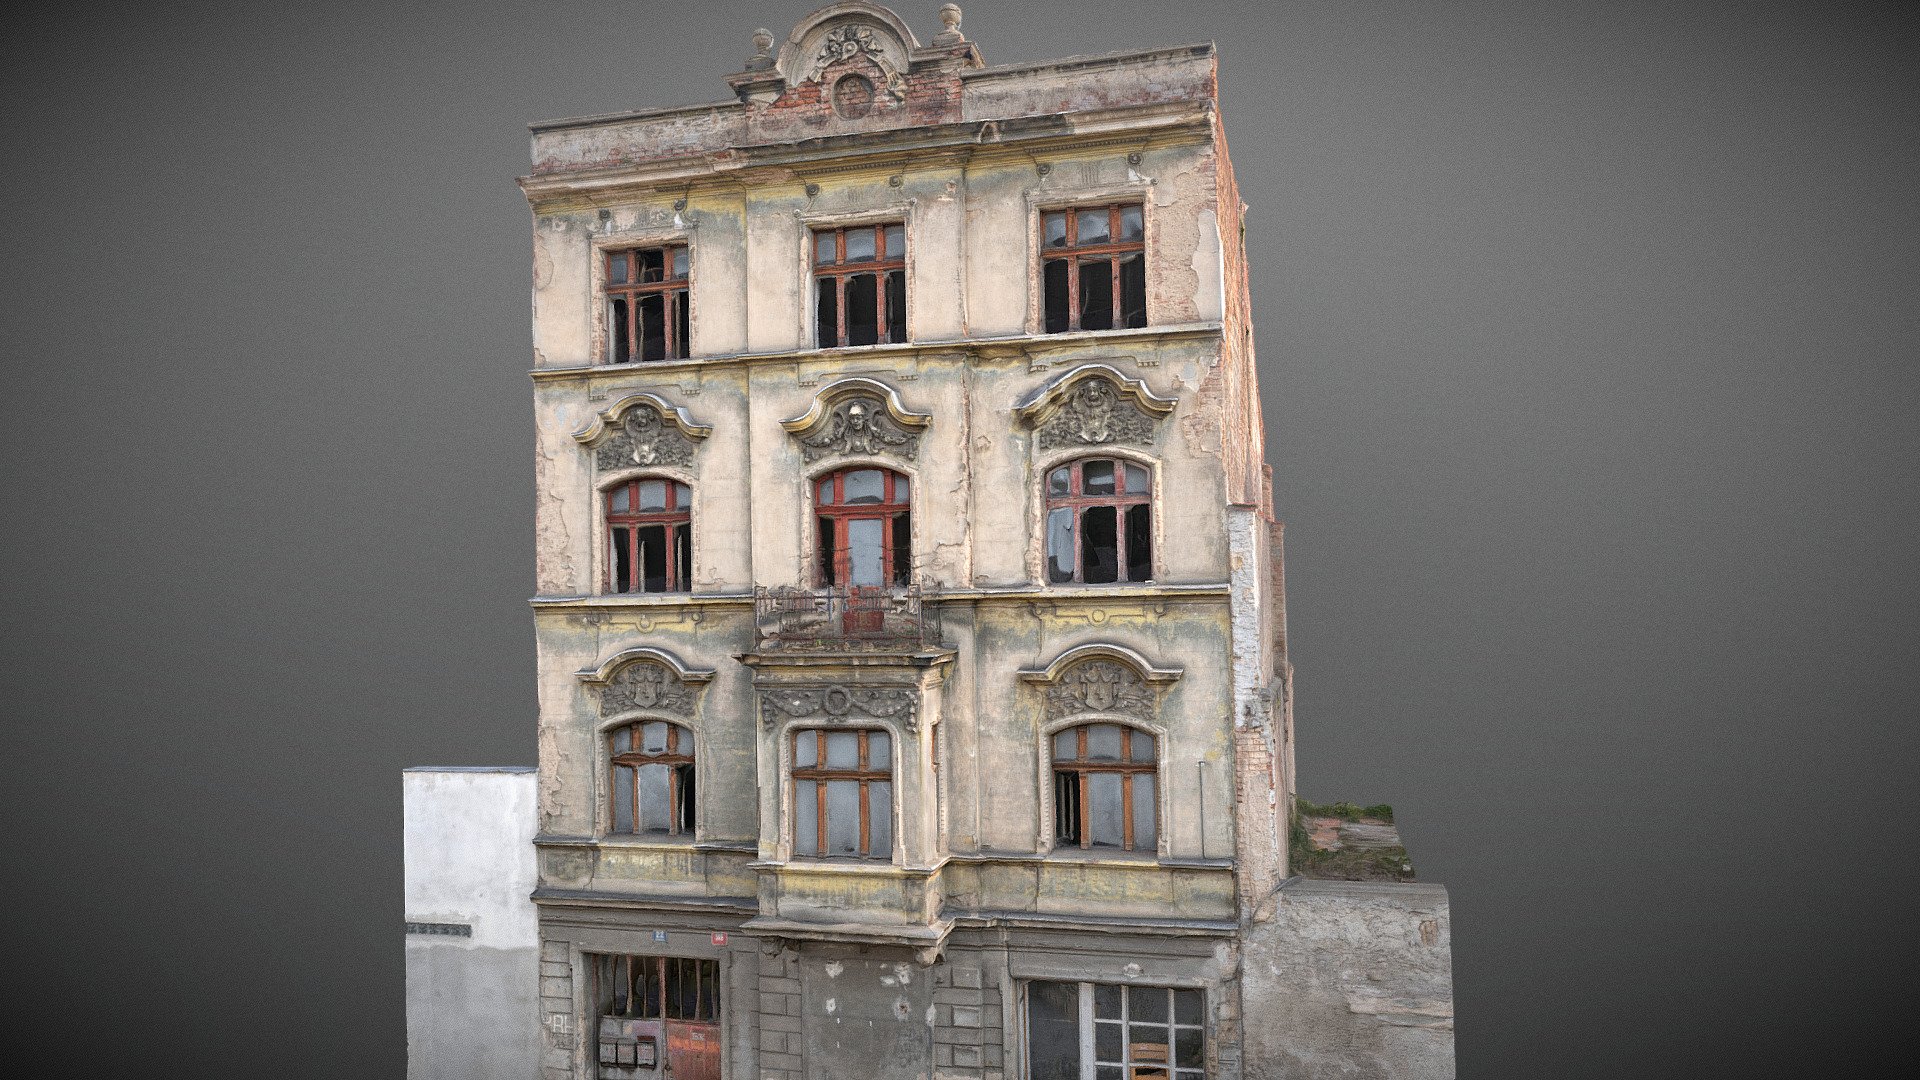 Historic old Early 20th century cupid decorated brick ruined derelict abandoned house building facade scene 3D model

photogrammetry scan (350x36MP), 5x8K texture +HD normals (as additional .zip) - contact me for source photos or re-exports

impossible to get proper shots from back sadly - Decorated house ruin 22 - Buy Royalty Free 3D model by matousekfoto 3d model